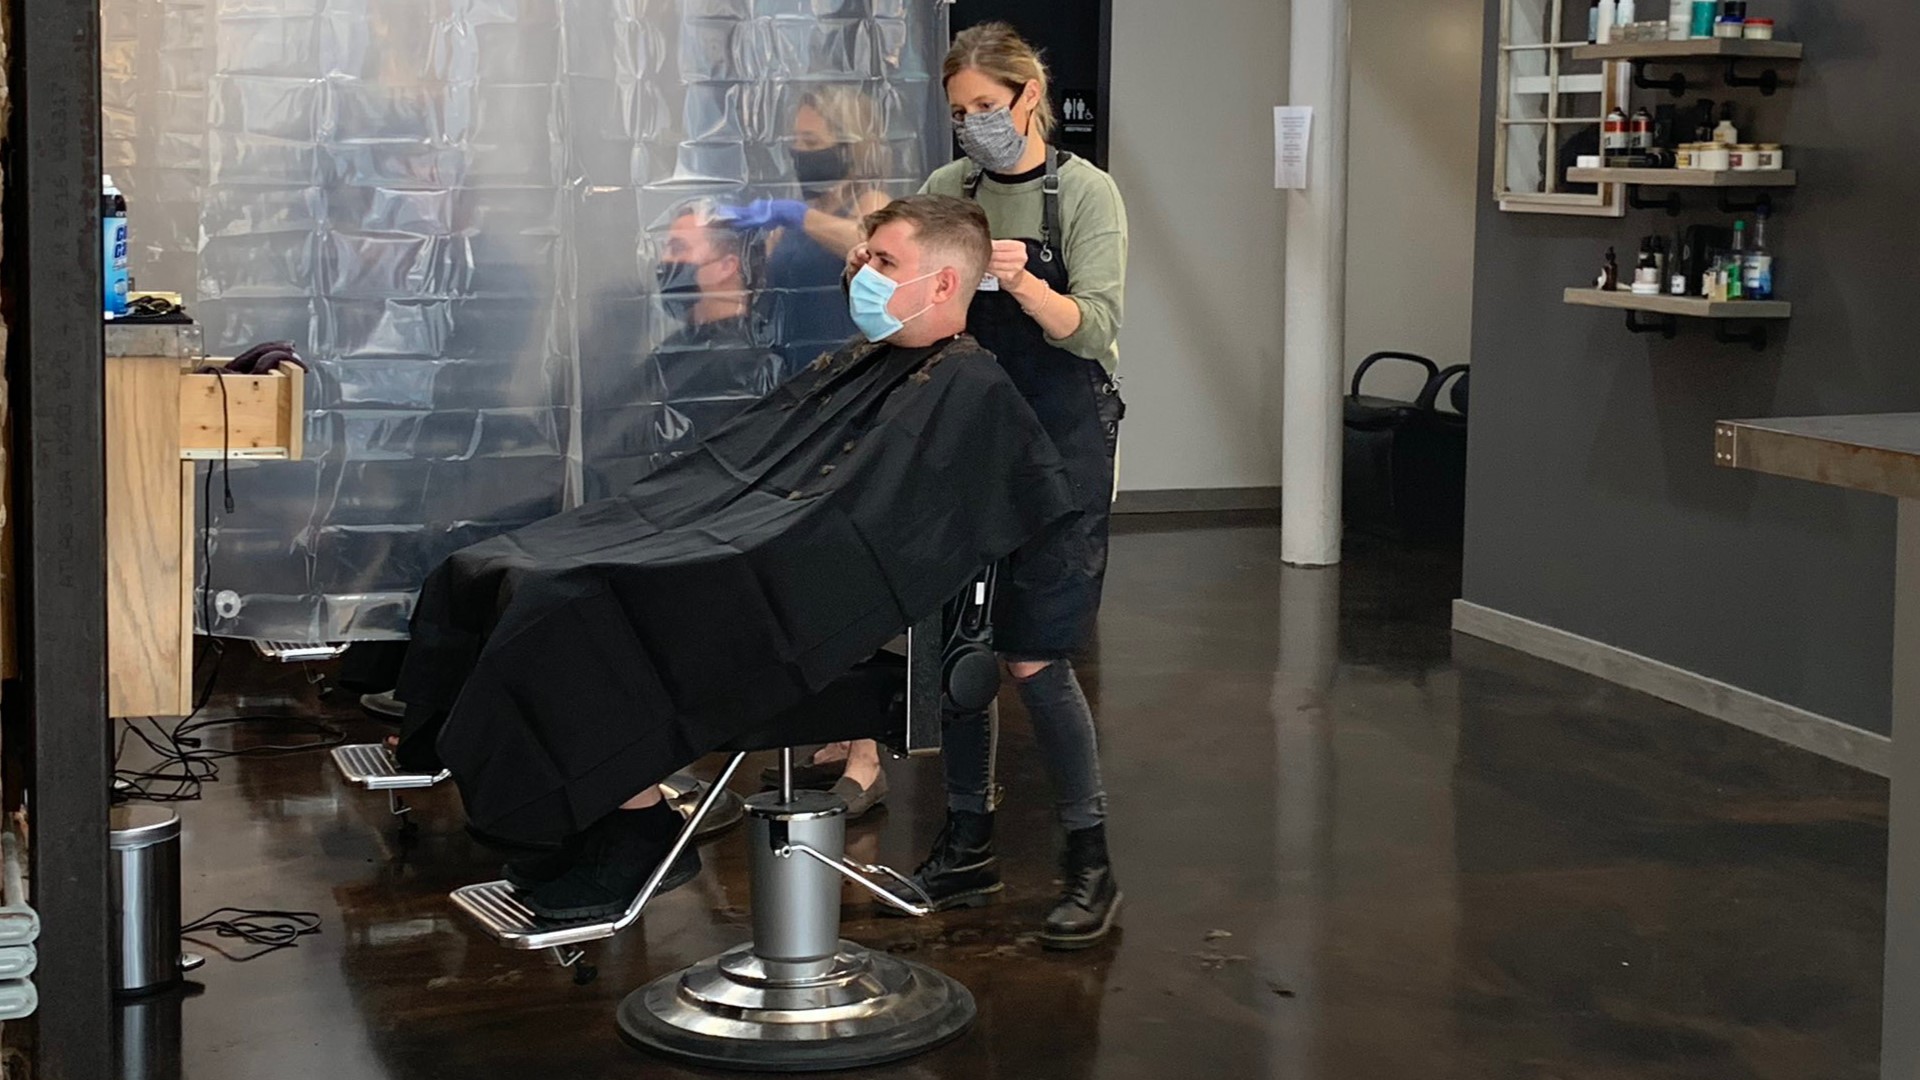 Beards and Beers was one of many Louisville barber shops and salons that have reopened weeks after the coronavirus pandemic shut them down.